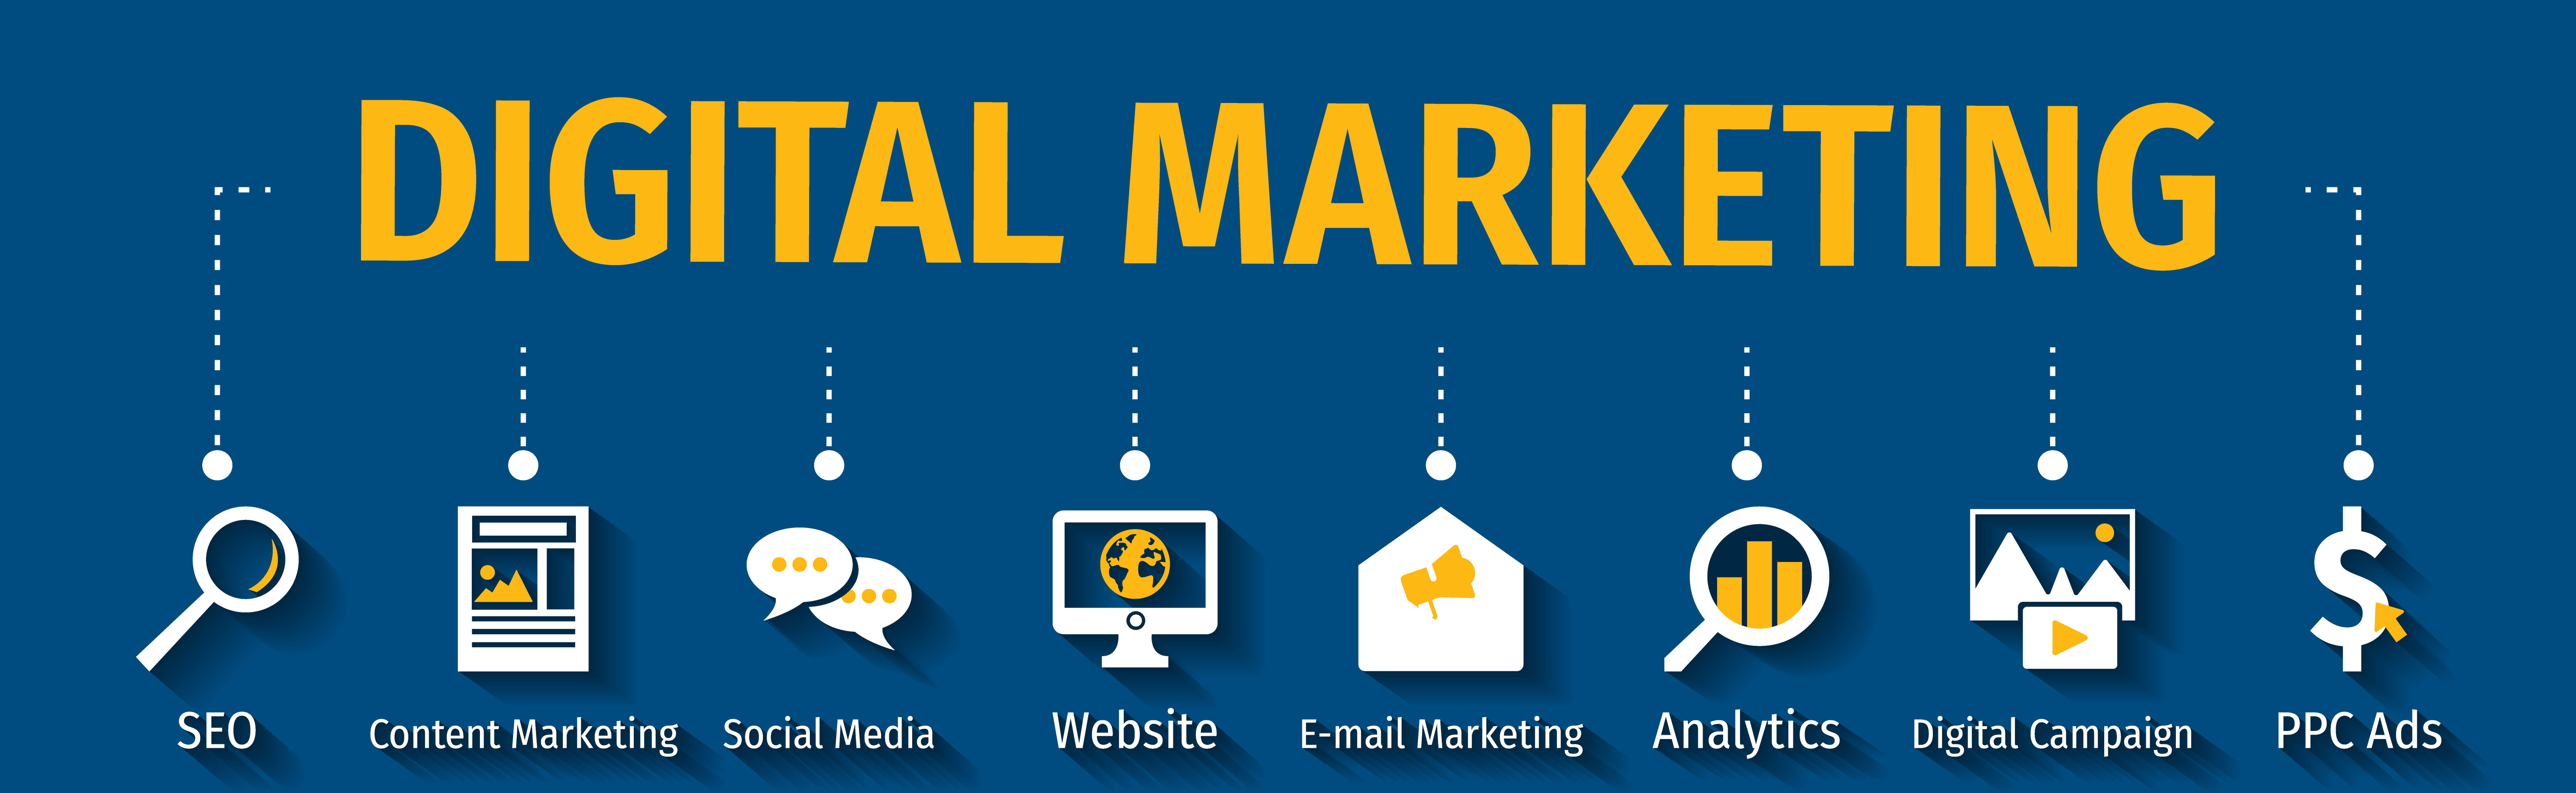 The image displays a digital marketing infographic with various elements related to online advertising and strategies, including text, icons, and a color scheme of blue and yellow.